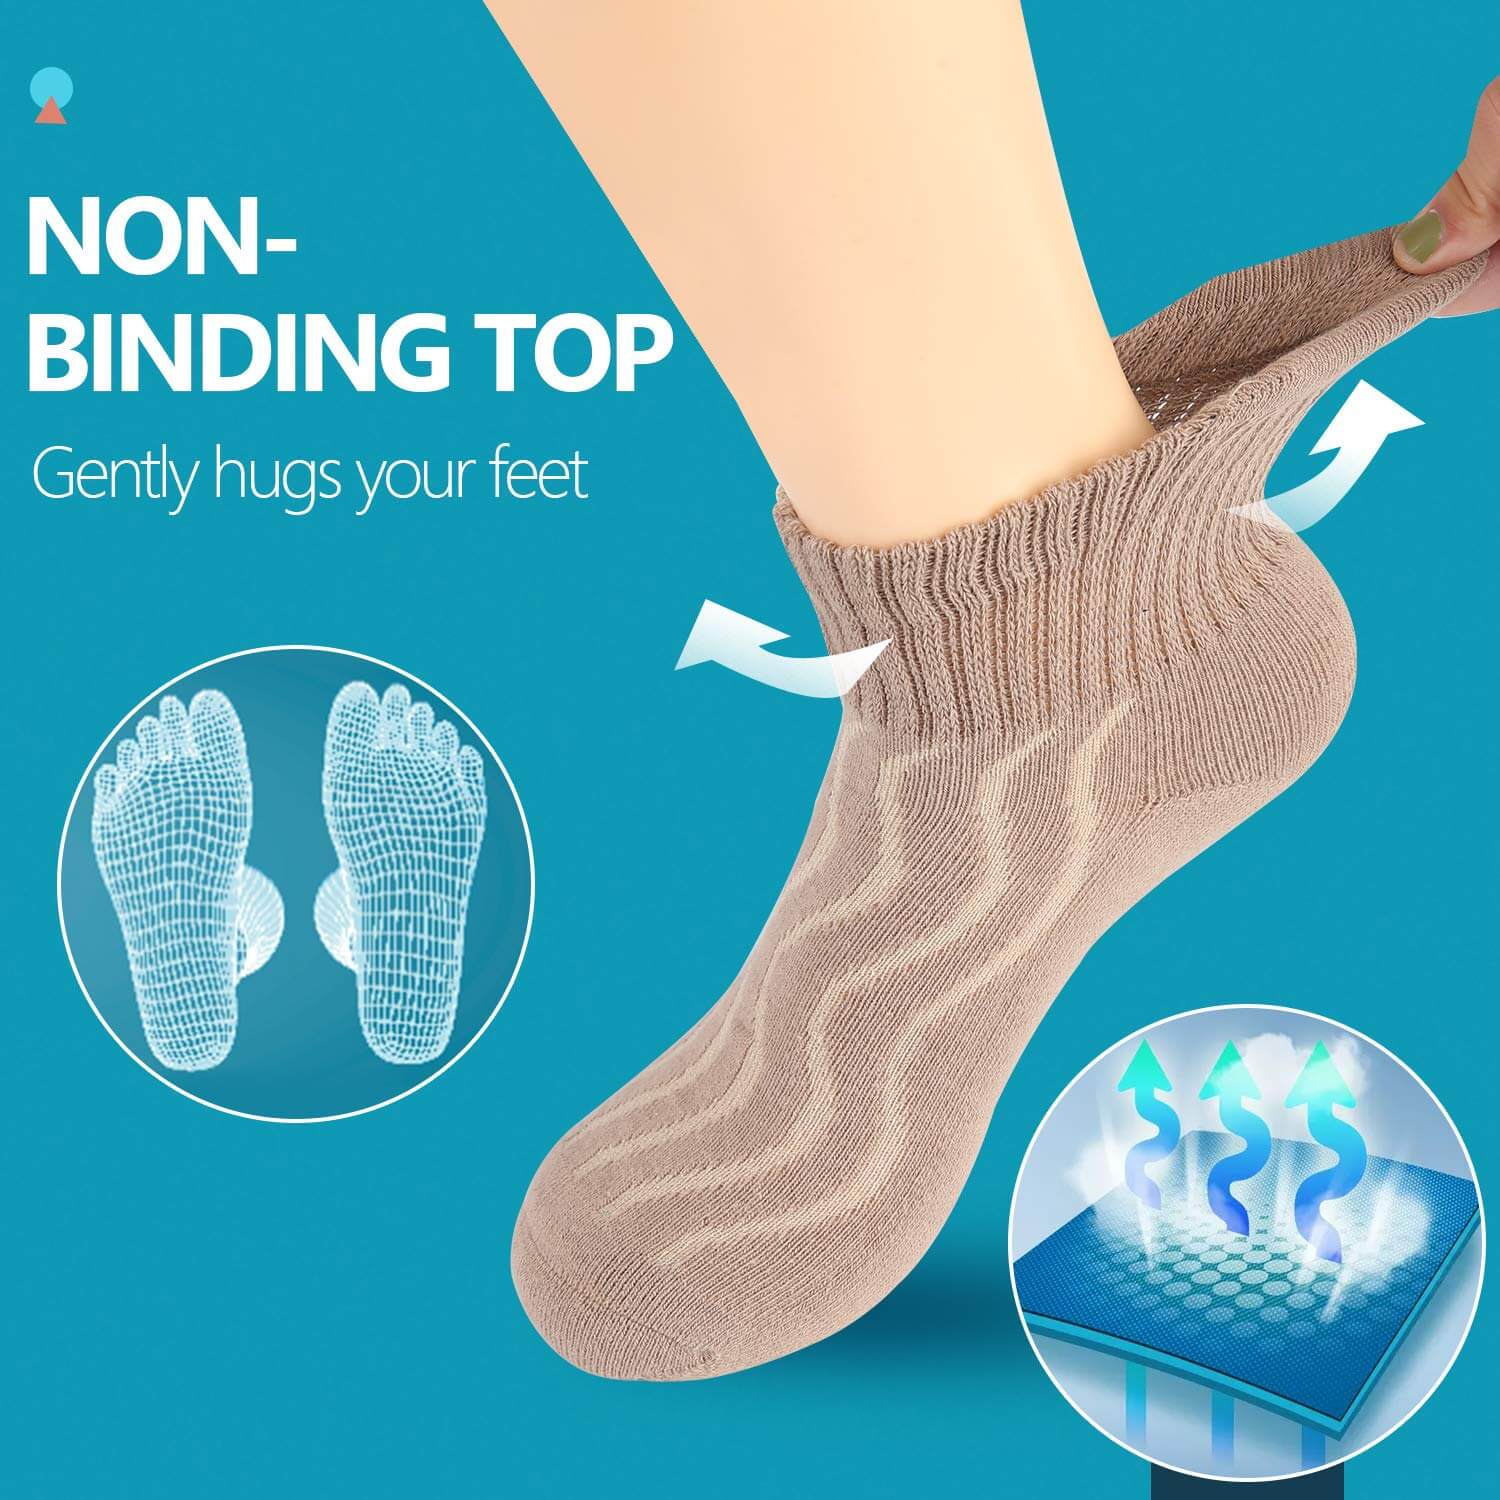 Wide non-binding crew seamless toe Bamboo socks, air vent with cushion  sole, 6 pairs